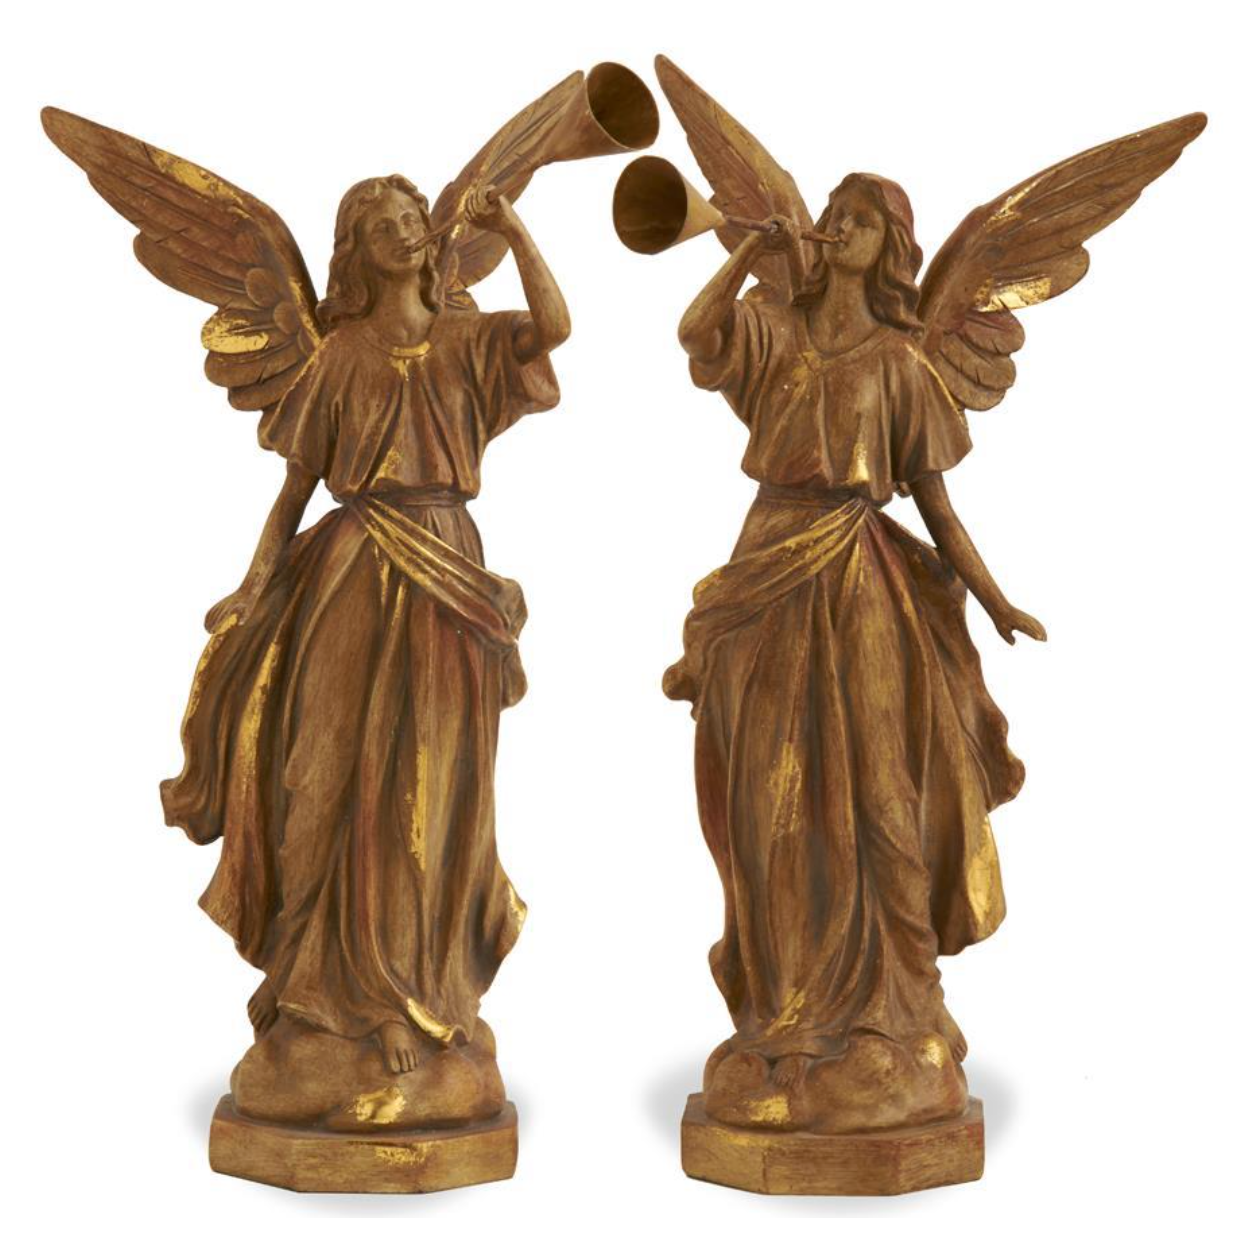 Vintage Angels Playing Trumpets - Set of 2